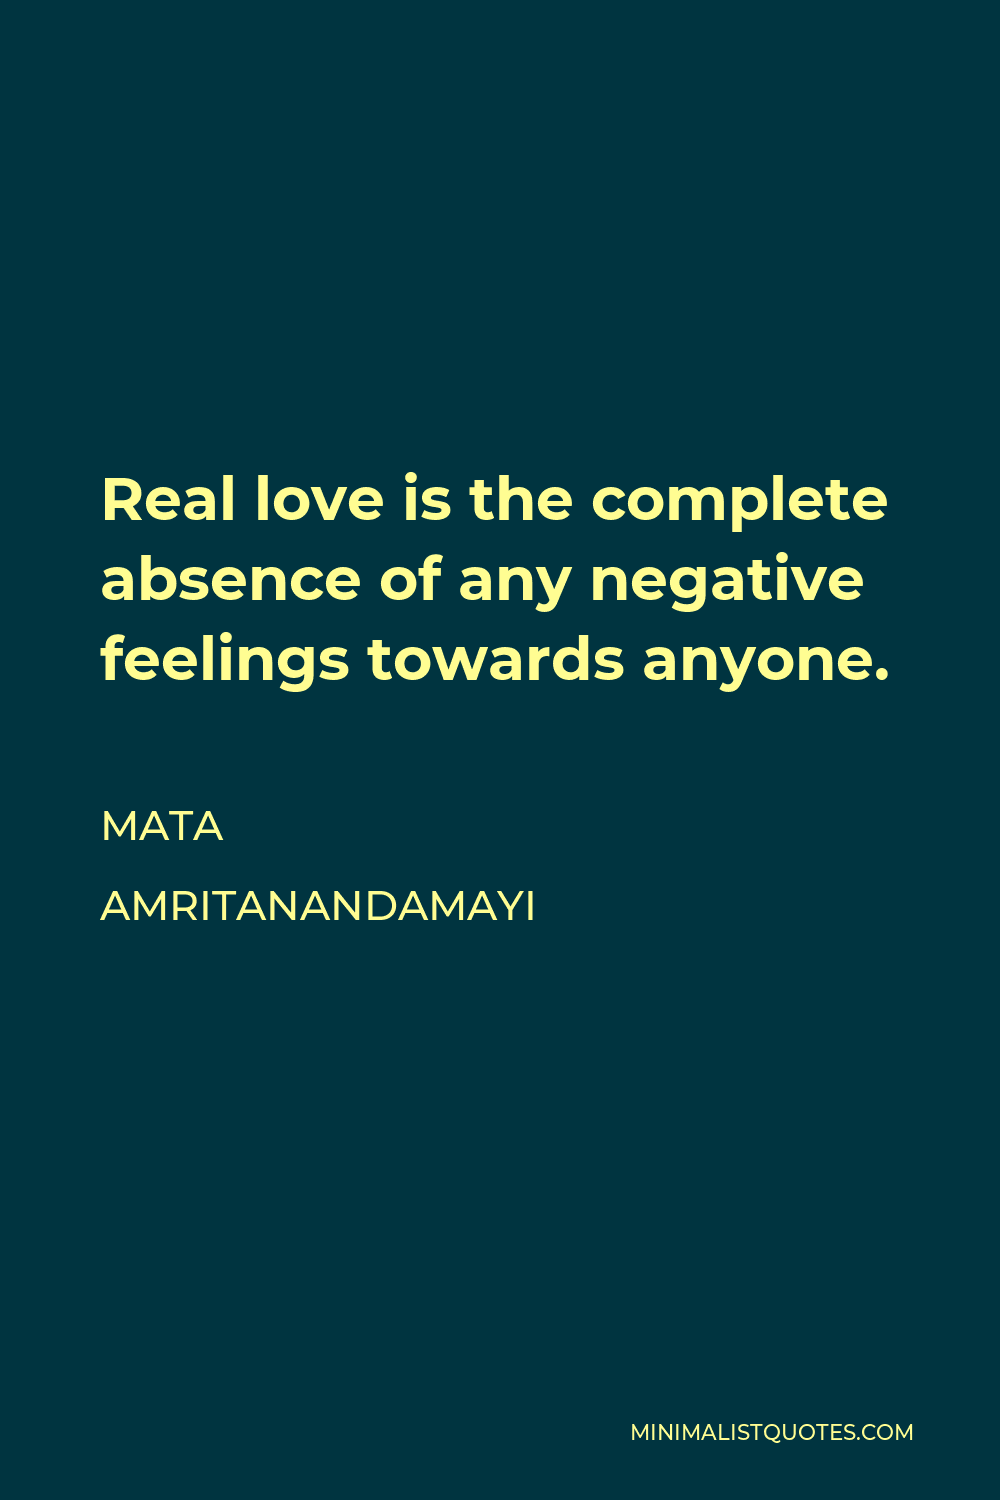 Mata Amritanandamayi Quote - Real love is the complete absence of any negative feelings towards anyone.